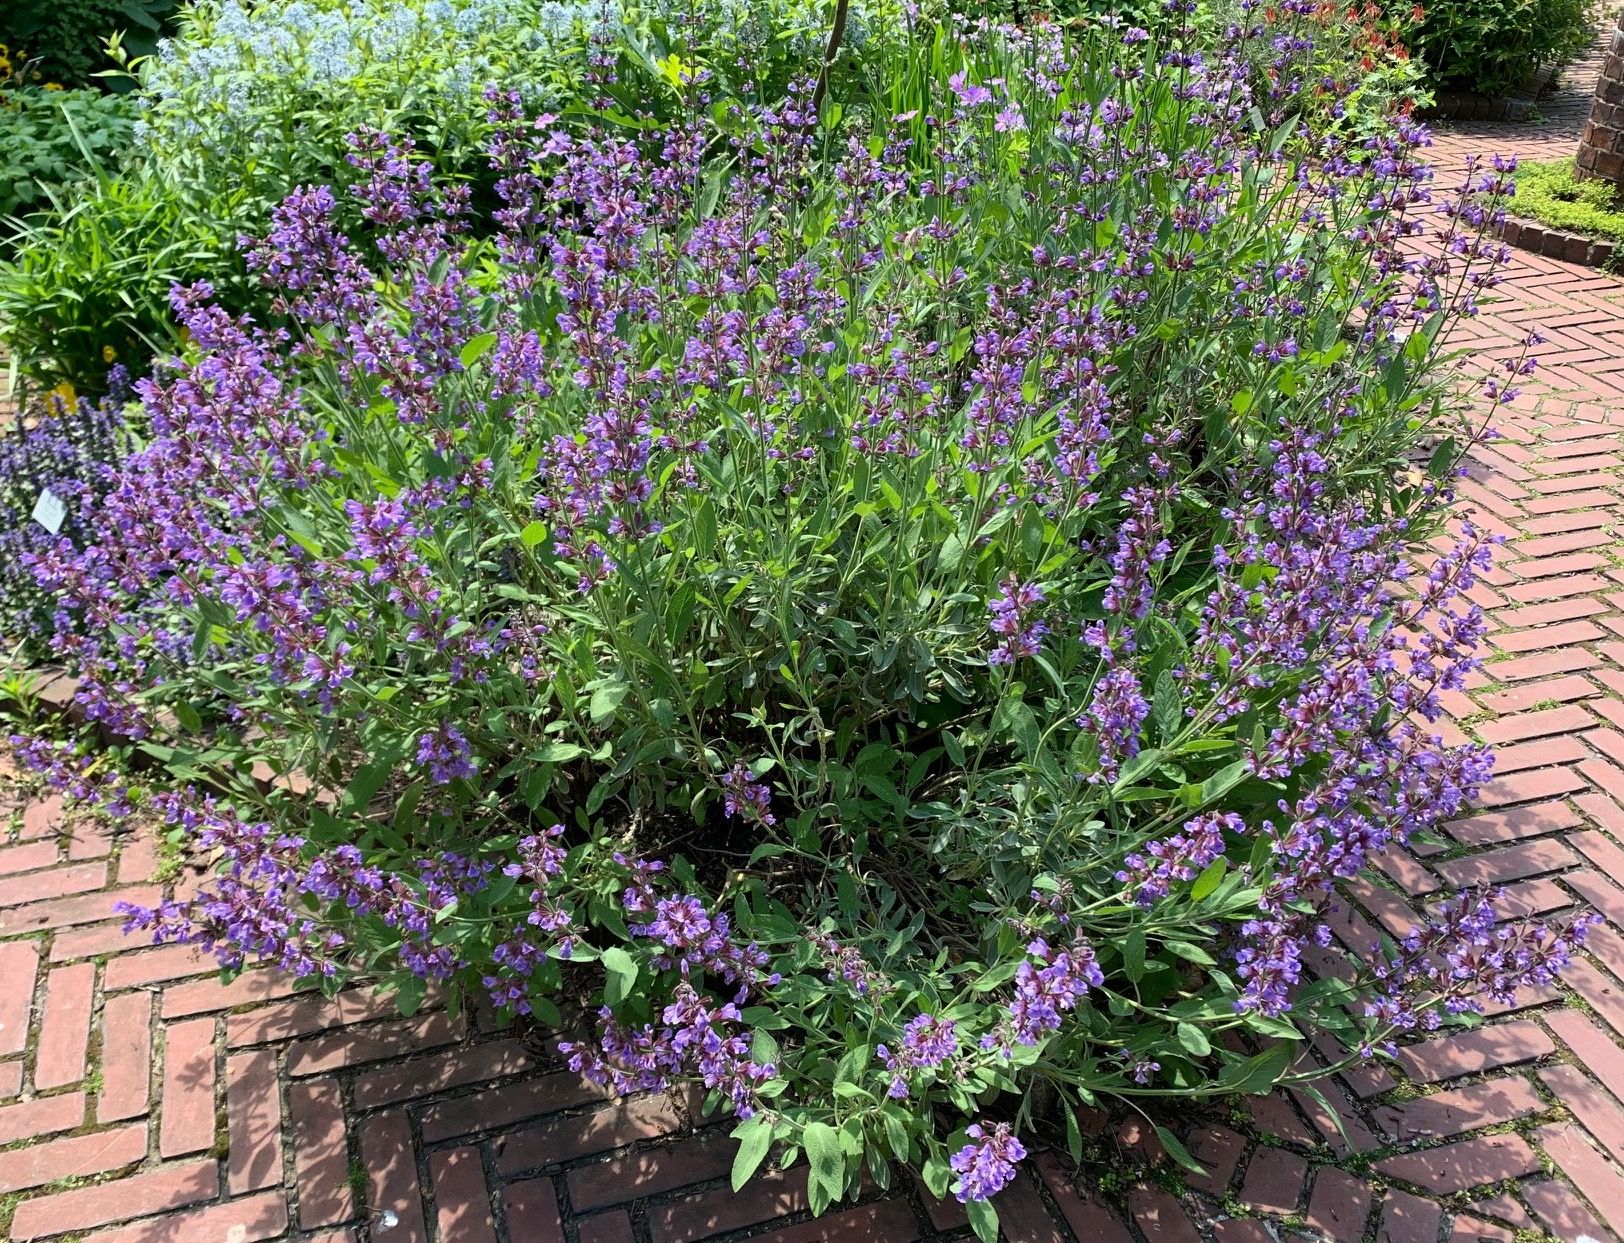 Sage in bloom with bright purple flowers.  